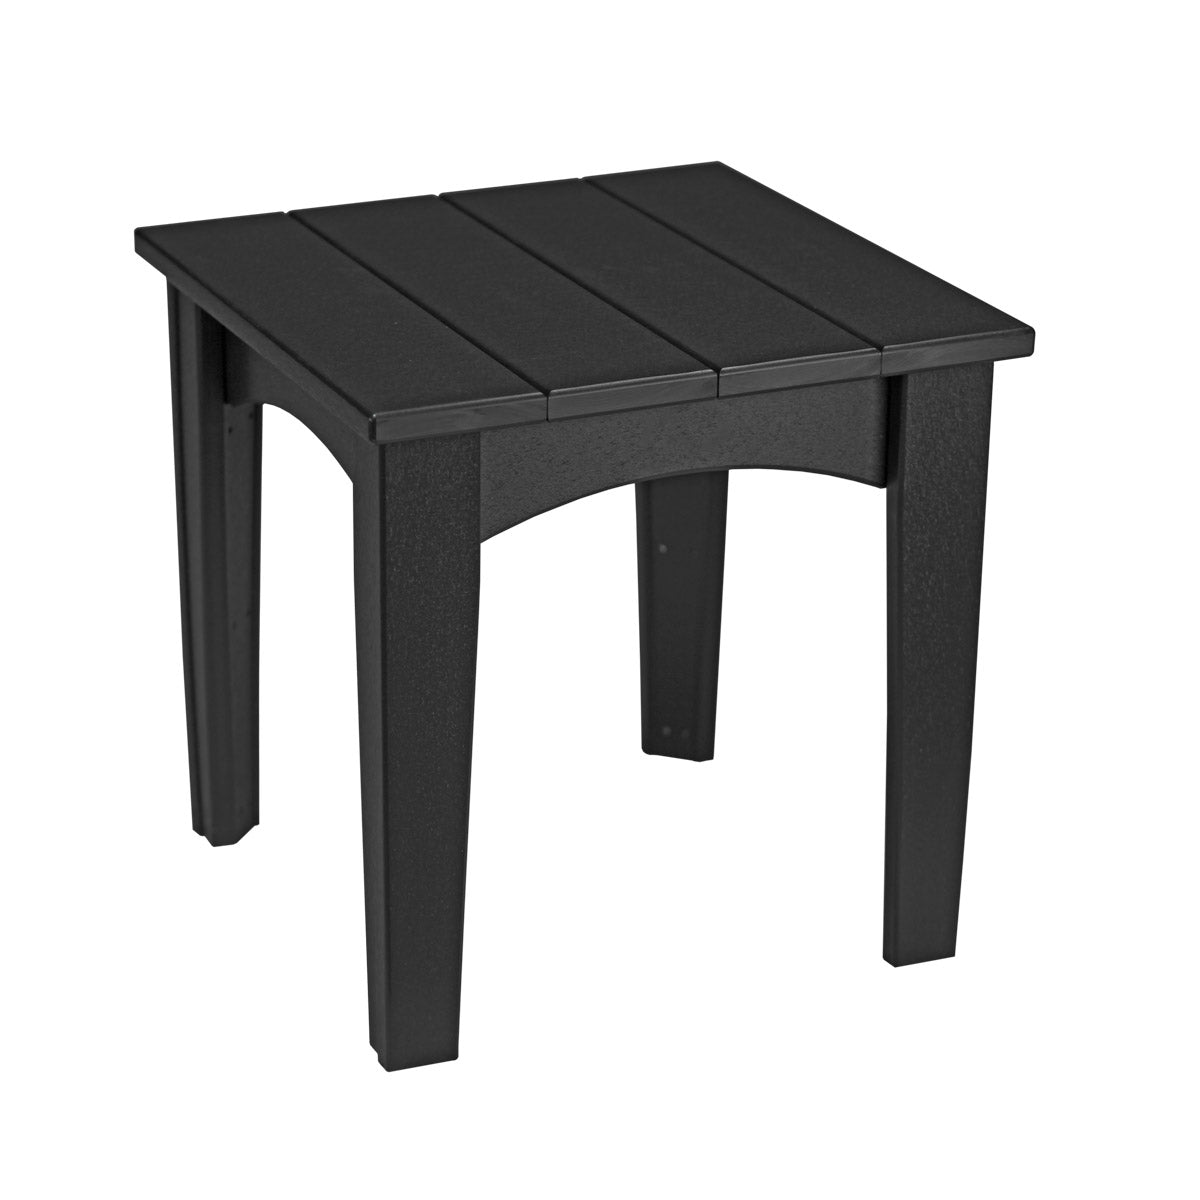 Luxcraft Island End Table IET